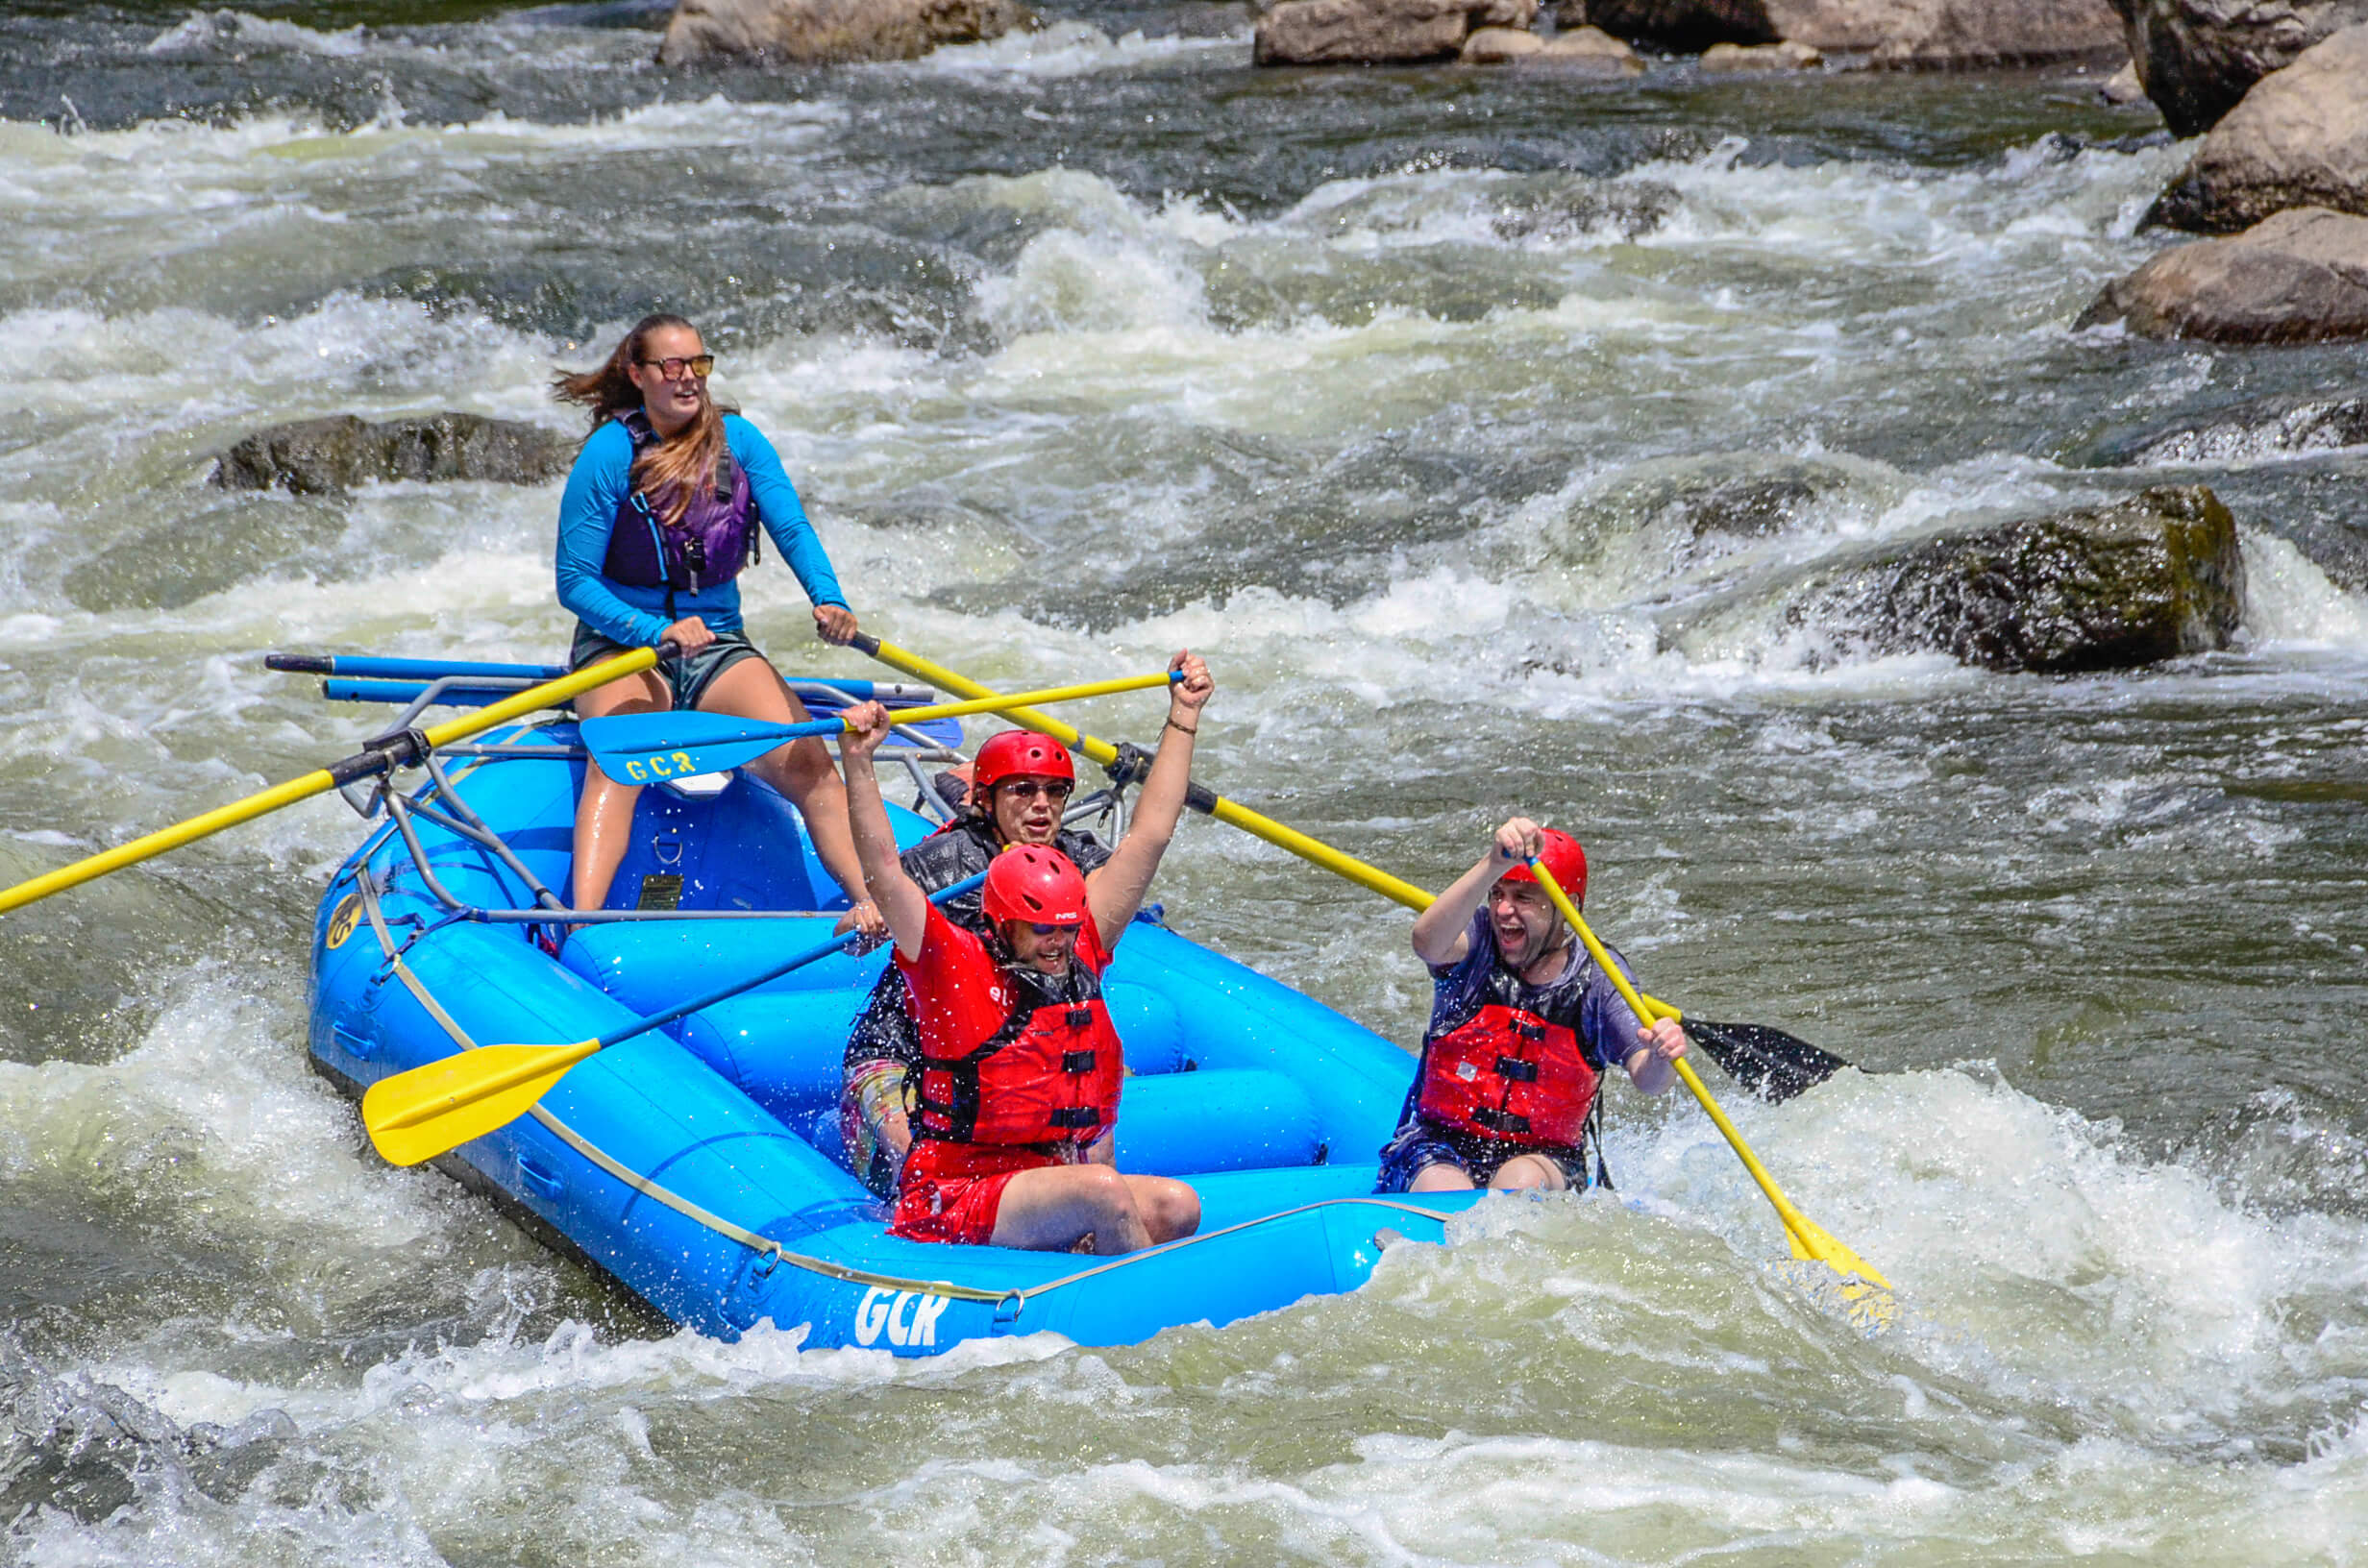 An image of a group of three rafters and their guide paddling through rapids. One rafter lifts paddle over his head in victory and celebration of the activity.